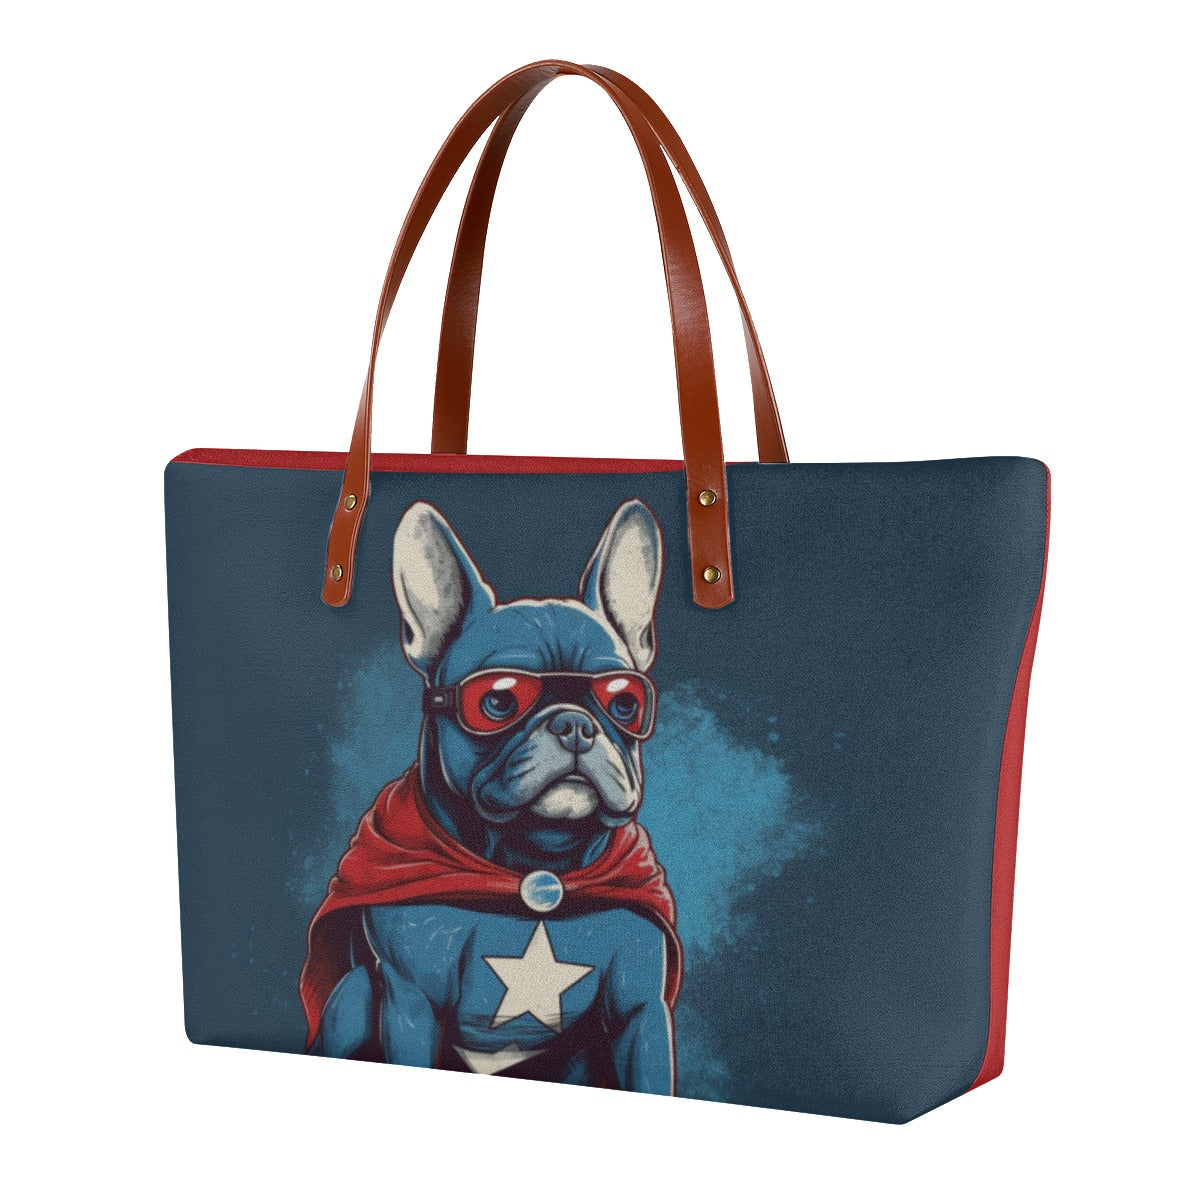 French Bulldog Women's Tote Bag - Stylish and Functional Carryall for Frenchie Lovers